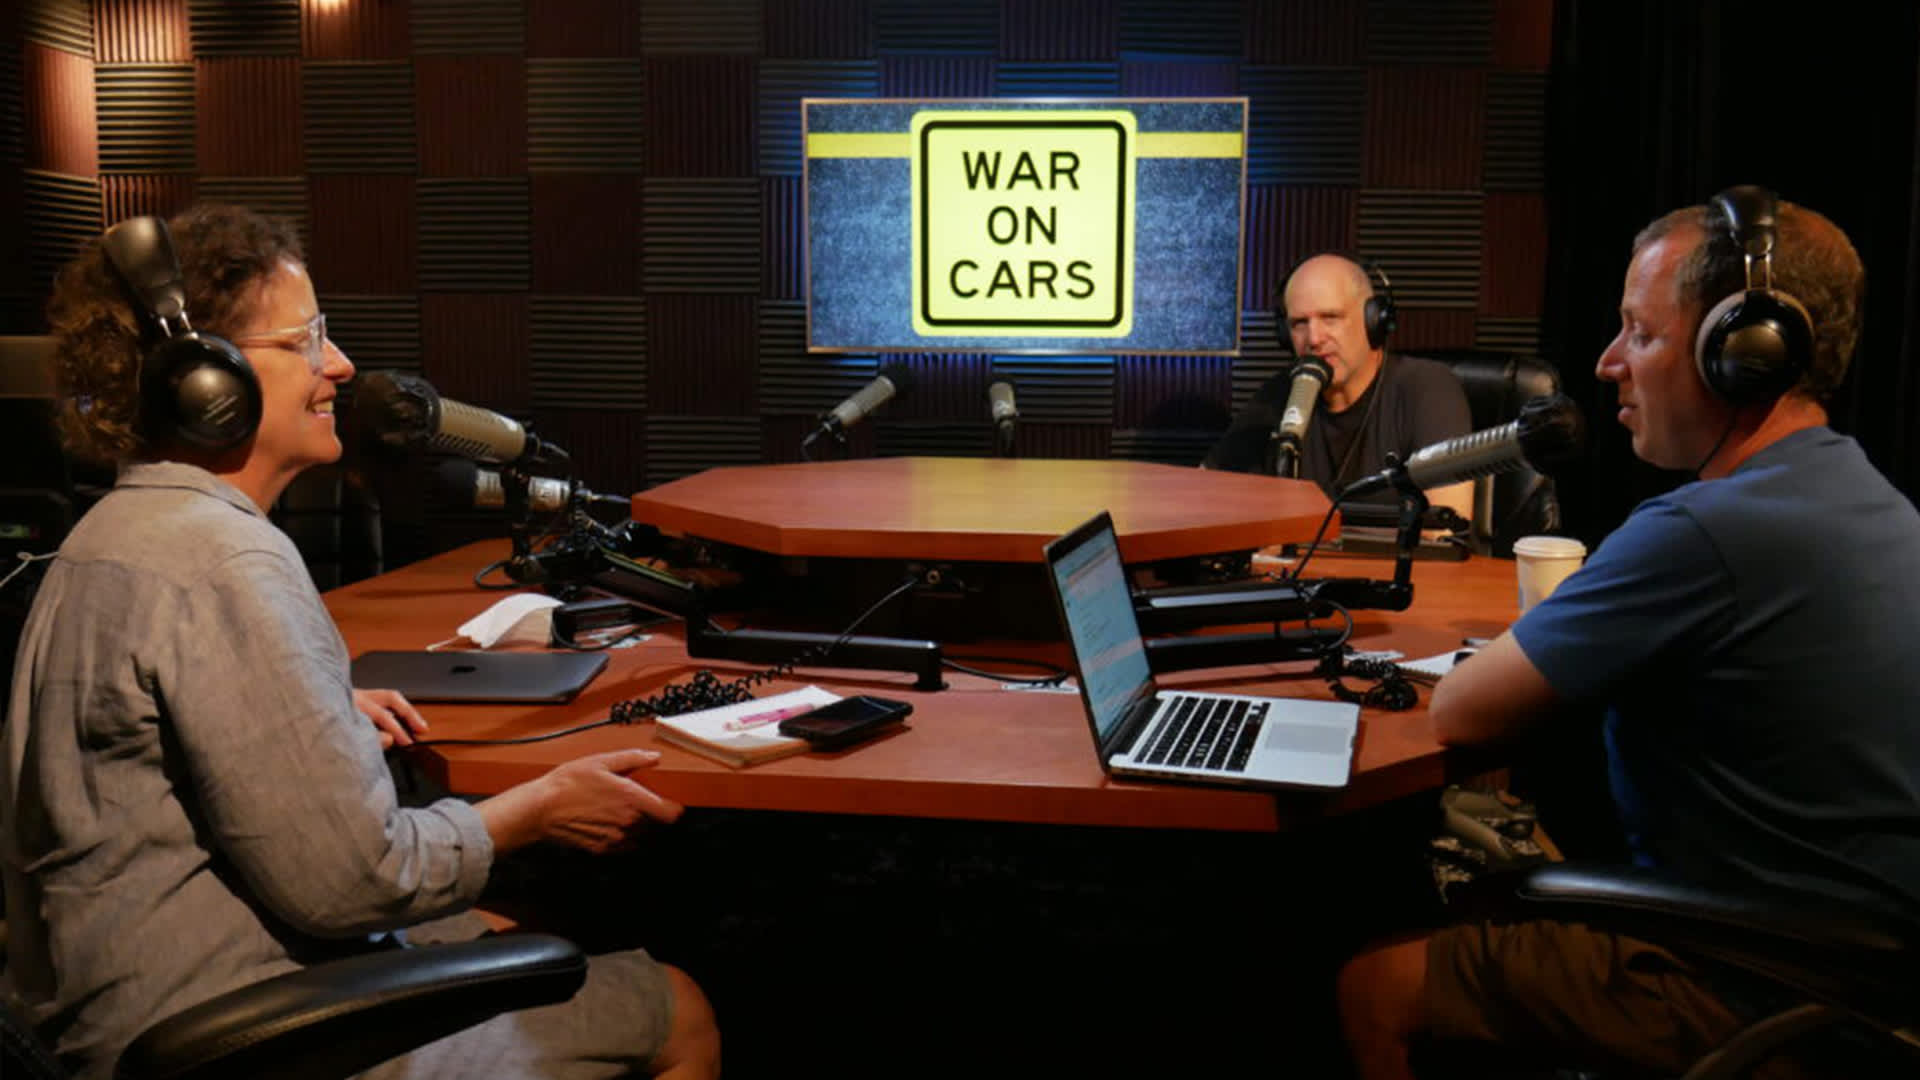 Hosts of The War on Cars in their studio. From left to right, Sarah Goodyear, Aaron Naparstek, and Doug Gordon. (Image Credit: The War on Cars)